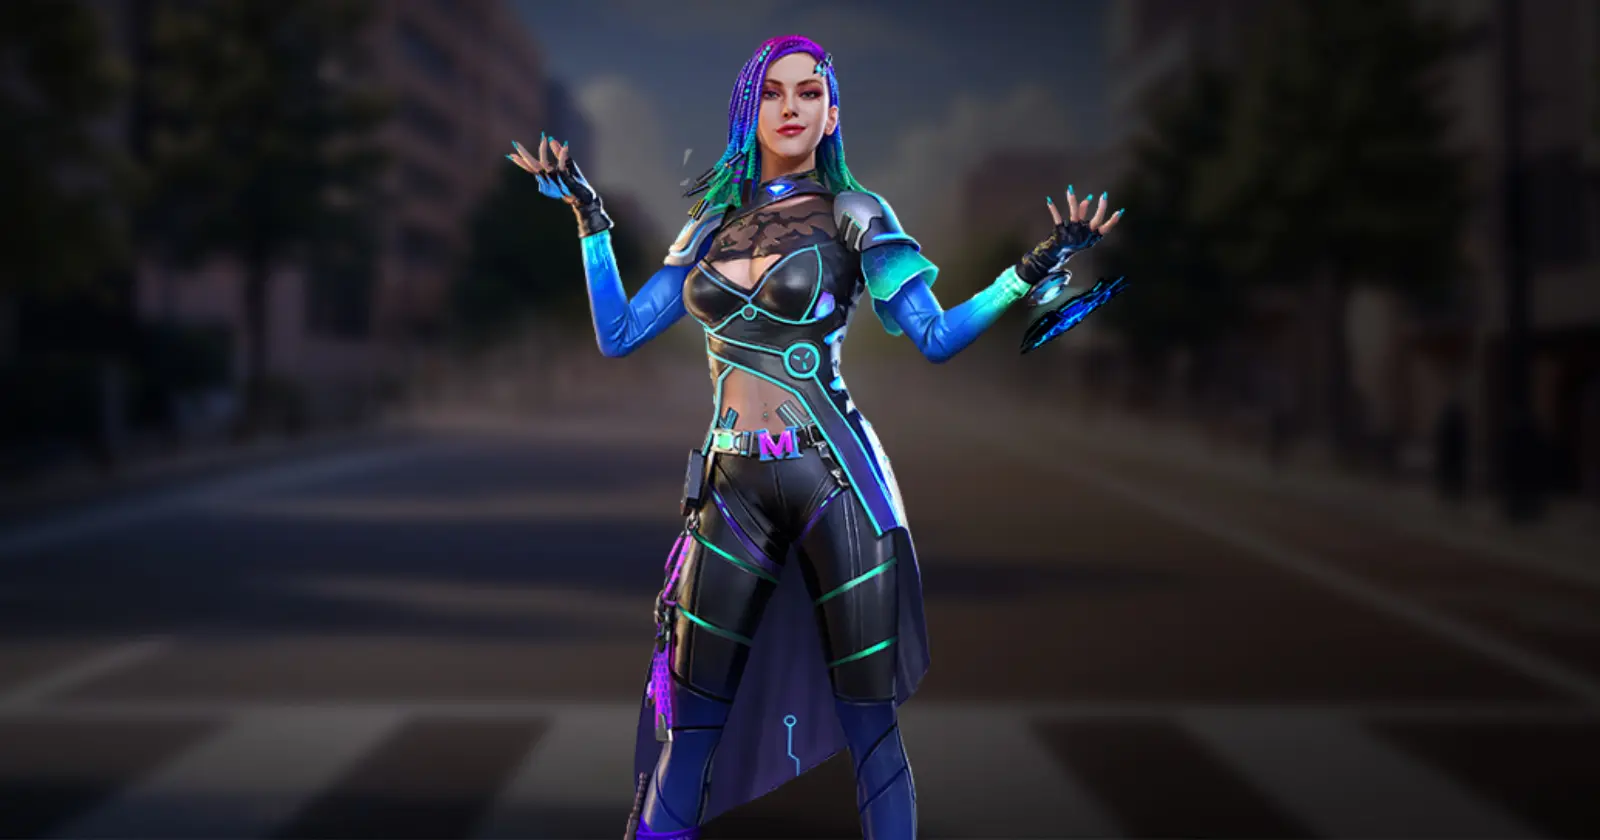 moco female character in a futuristic blue and black outfit stands, The character’s long purple hair complements the color scheme.